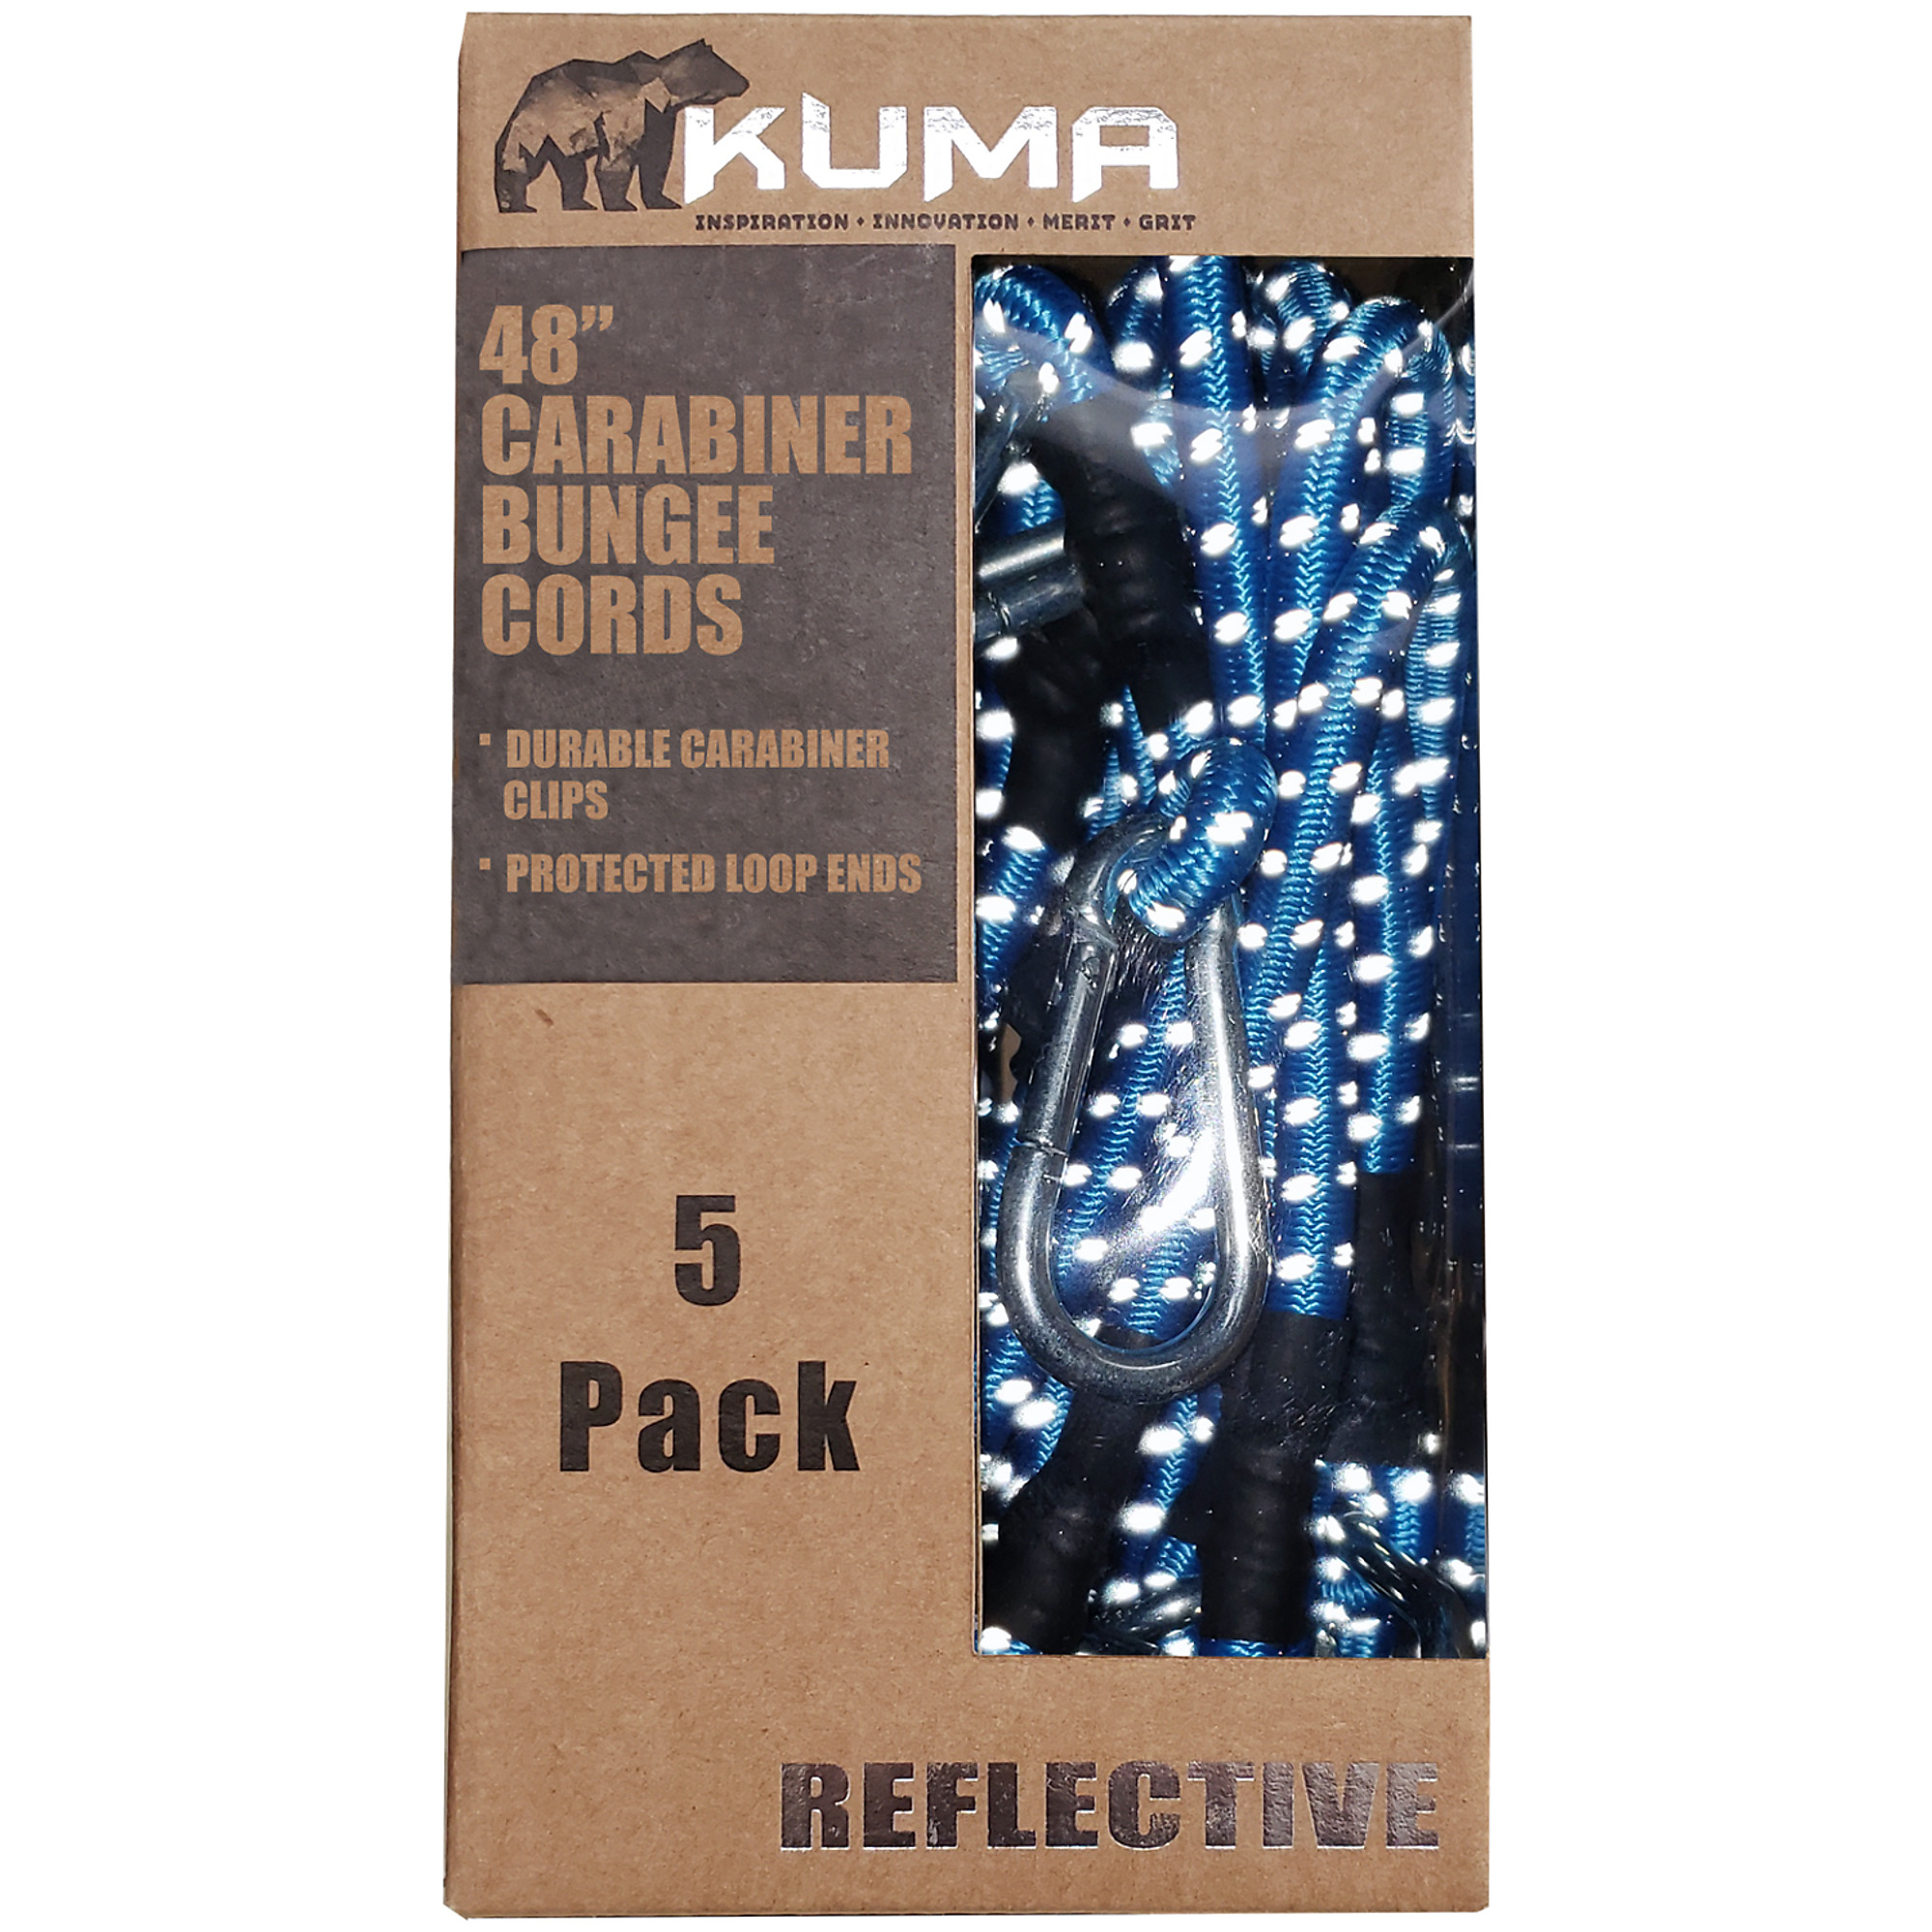 KUMA Reflective Rubber Adjustable Bungee Cord, 5 Count